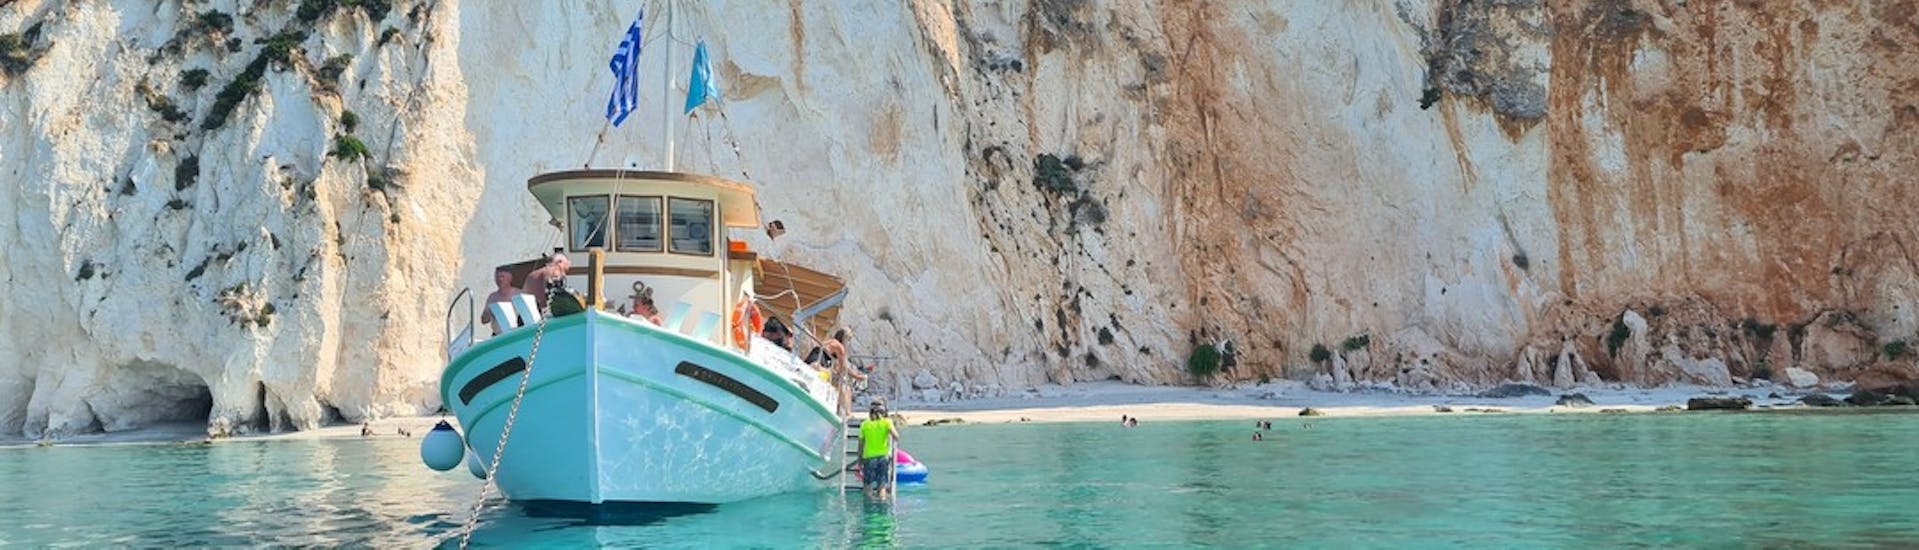 Dreamy Cruises boat standing in front of the White Rocks Beach during their boat trip around Kefalonia with traditional Greek lunch & snorkeling.